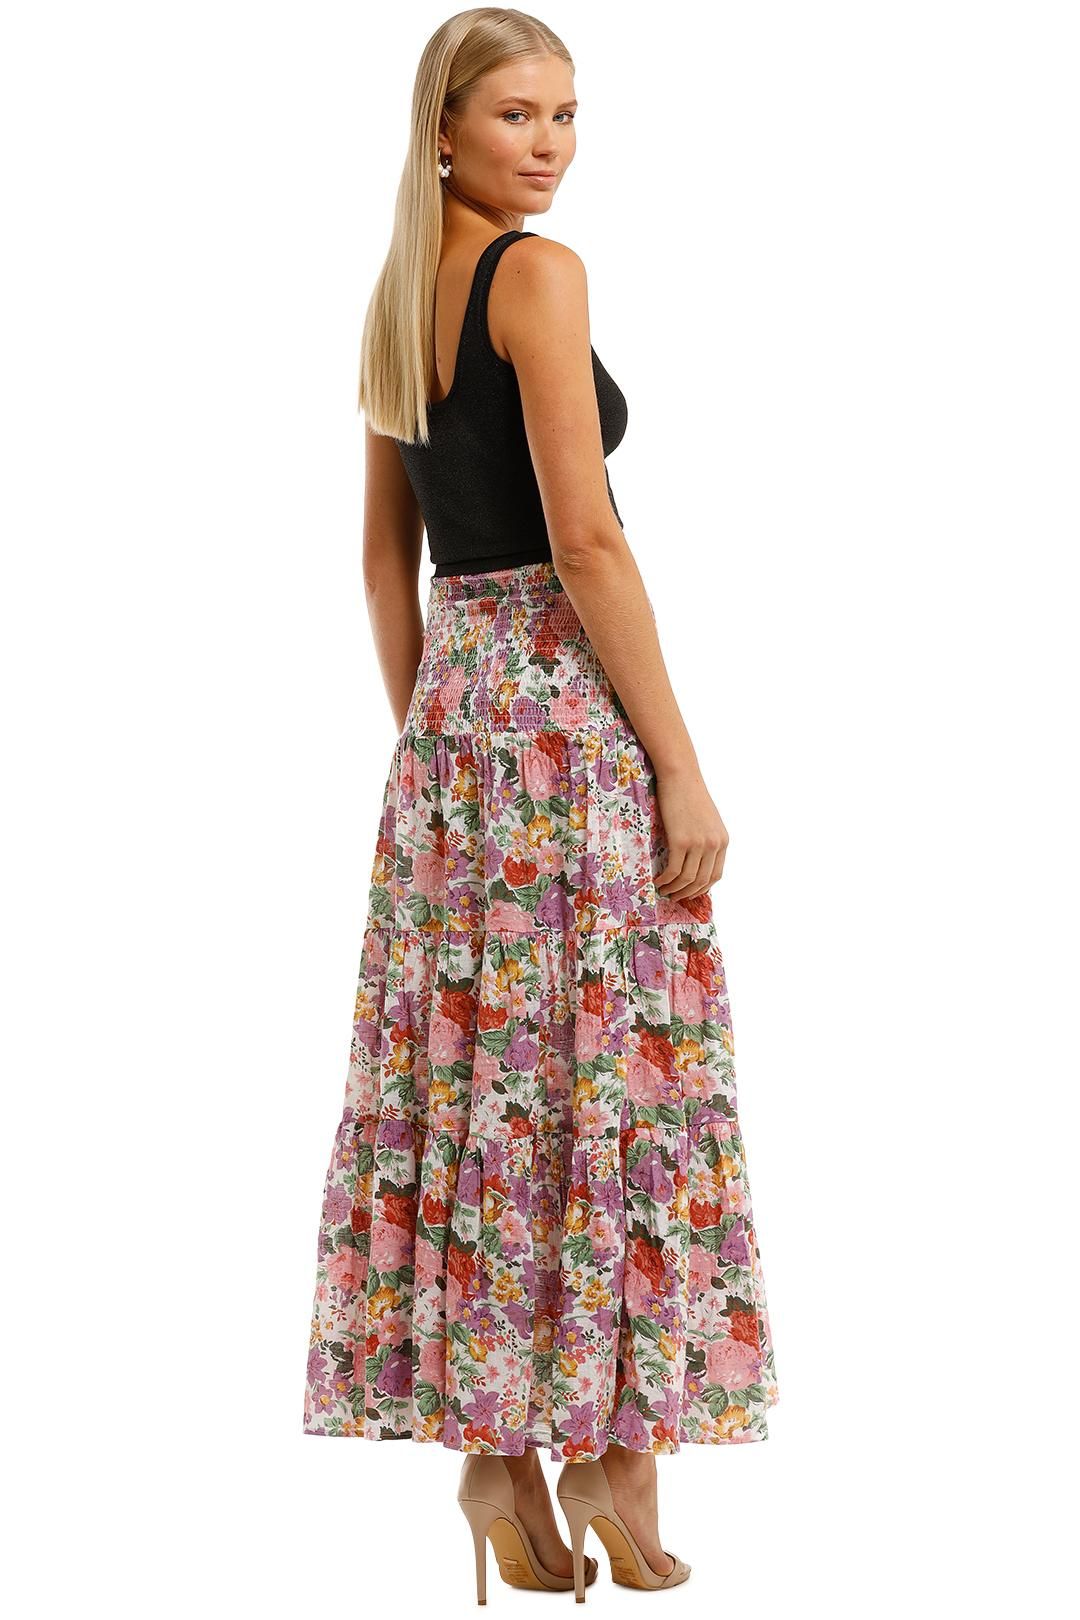 Auguste Camila Lucie Maxi Skirt Pink Red Floral Boho